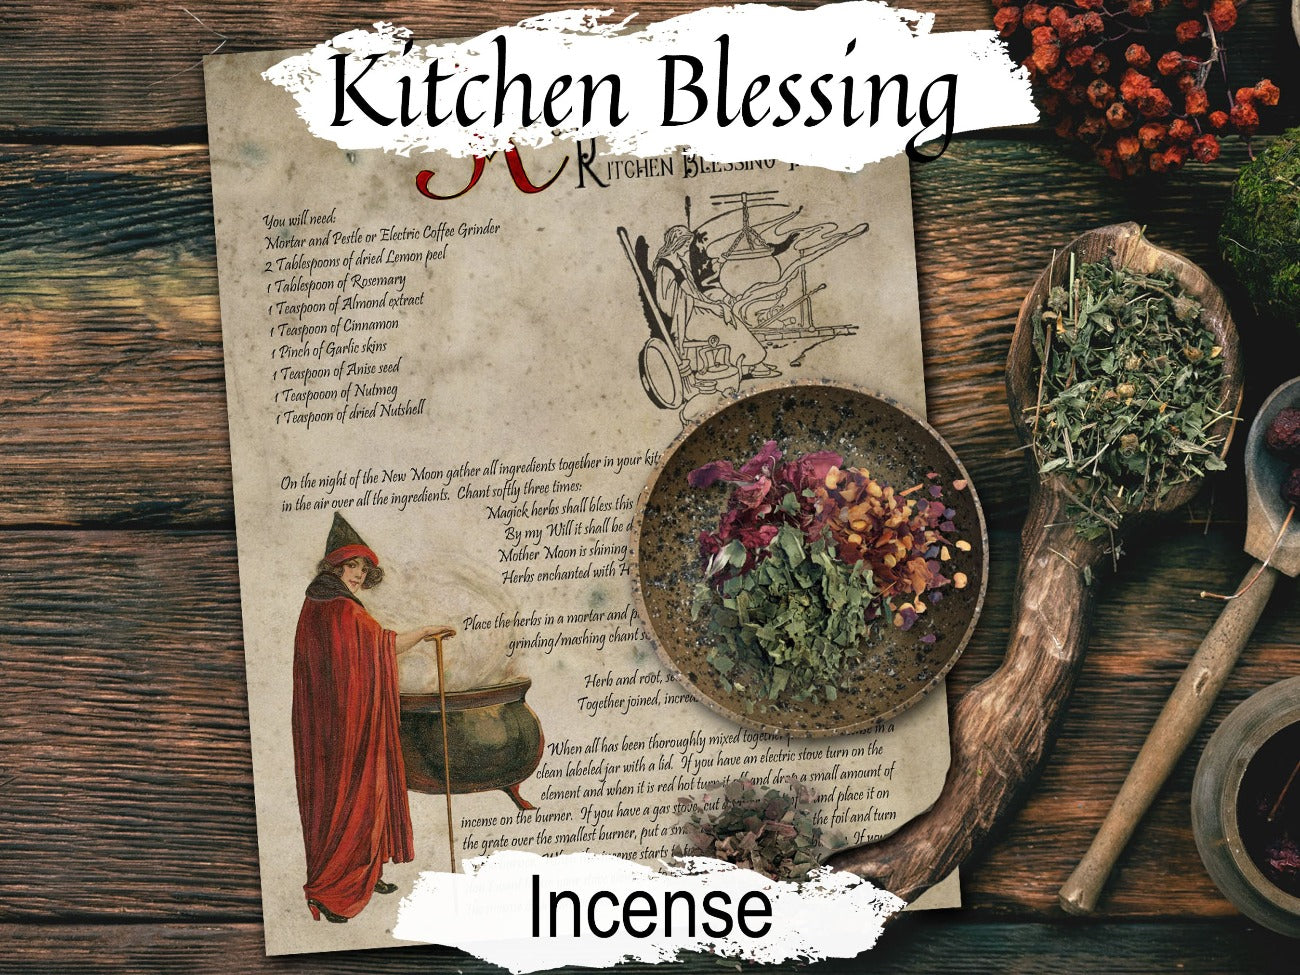 KITCHEN WITCH Blessing Incense, Cauldron Blend Incense Recipe, Wicca Kitchen Cooking Spell Potion, Cottage Witch Herb Garden, Green Witch - Morgana Magick Spell